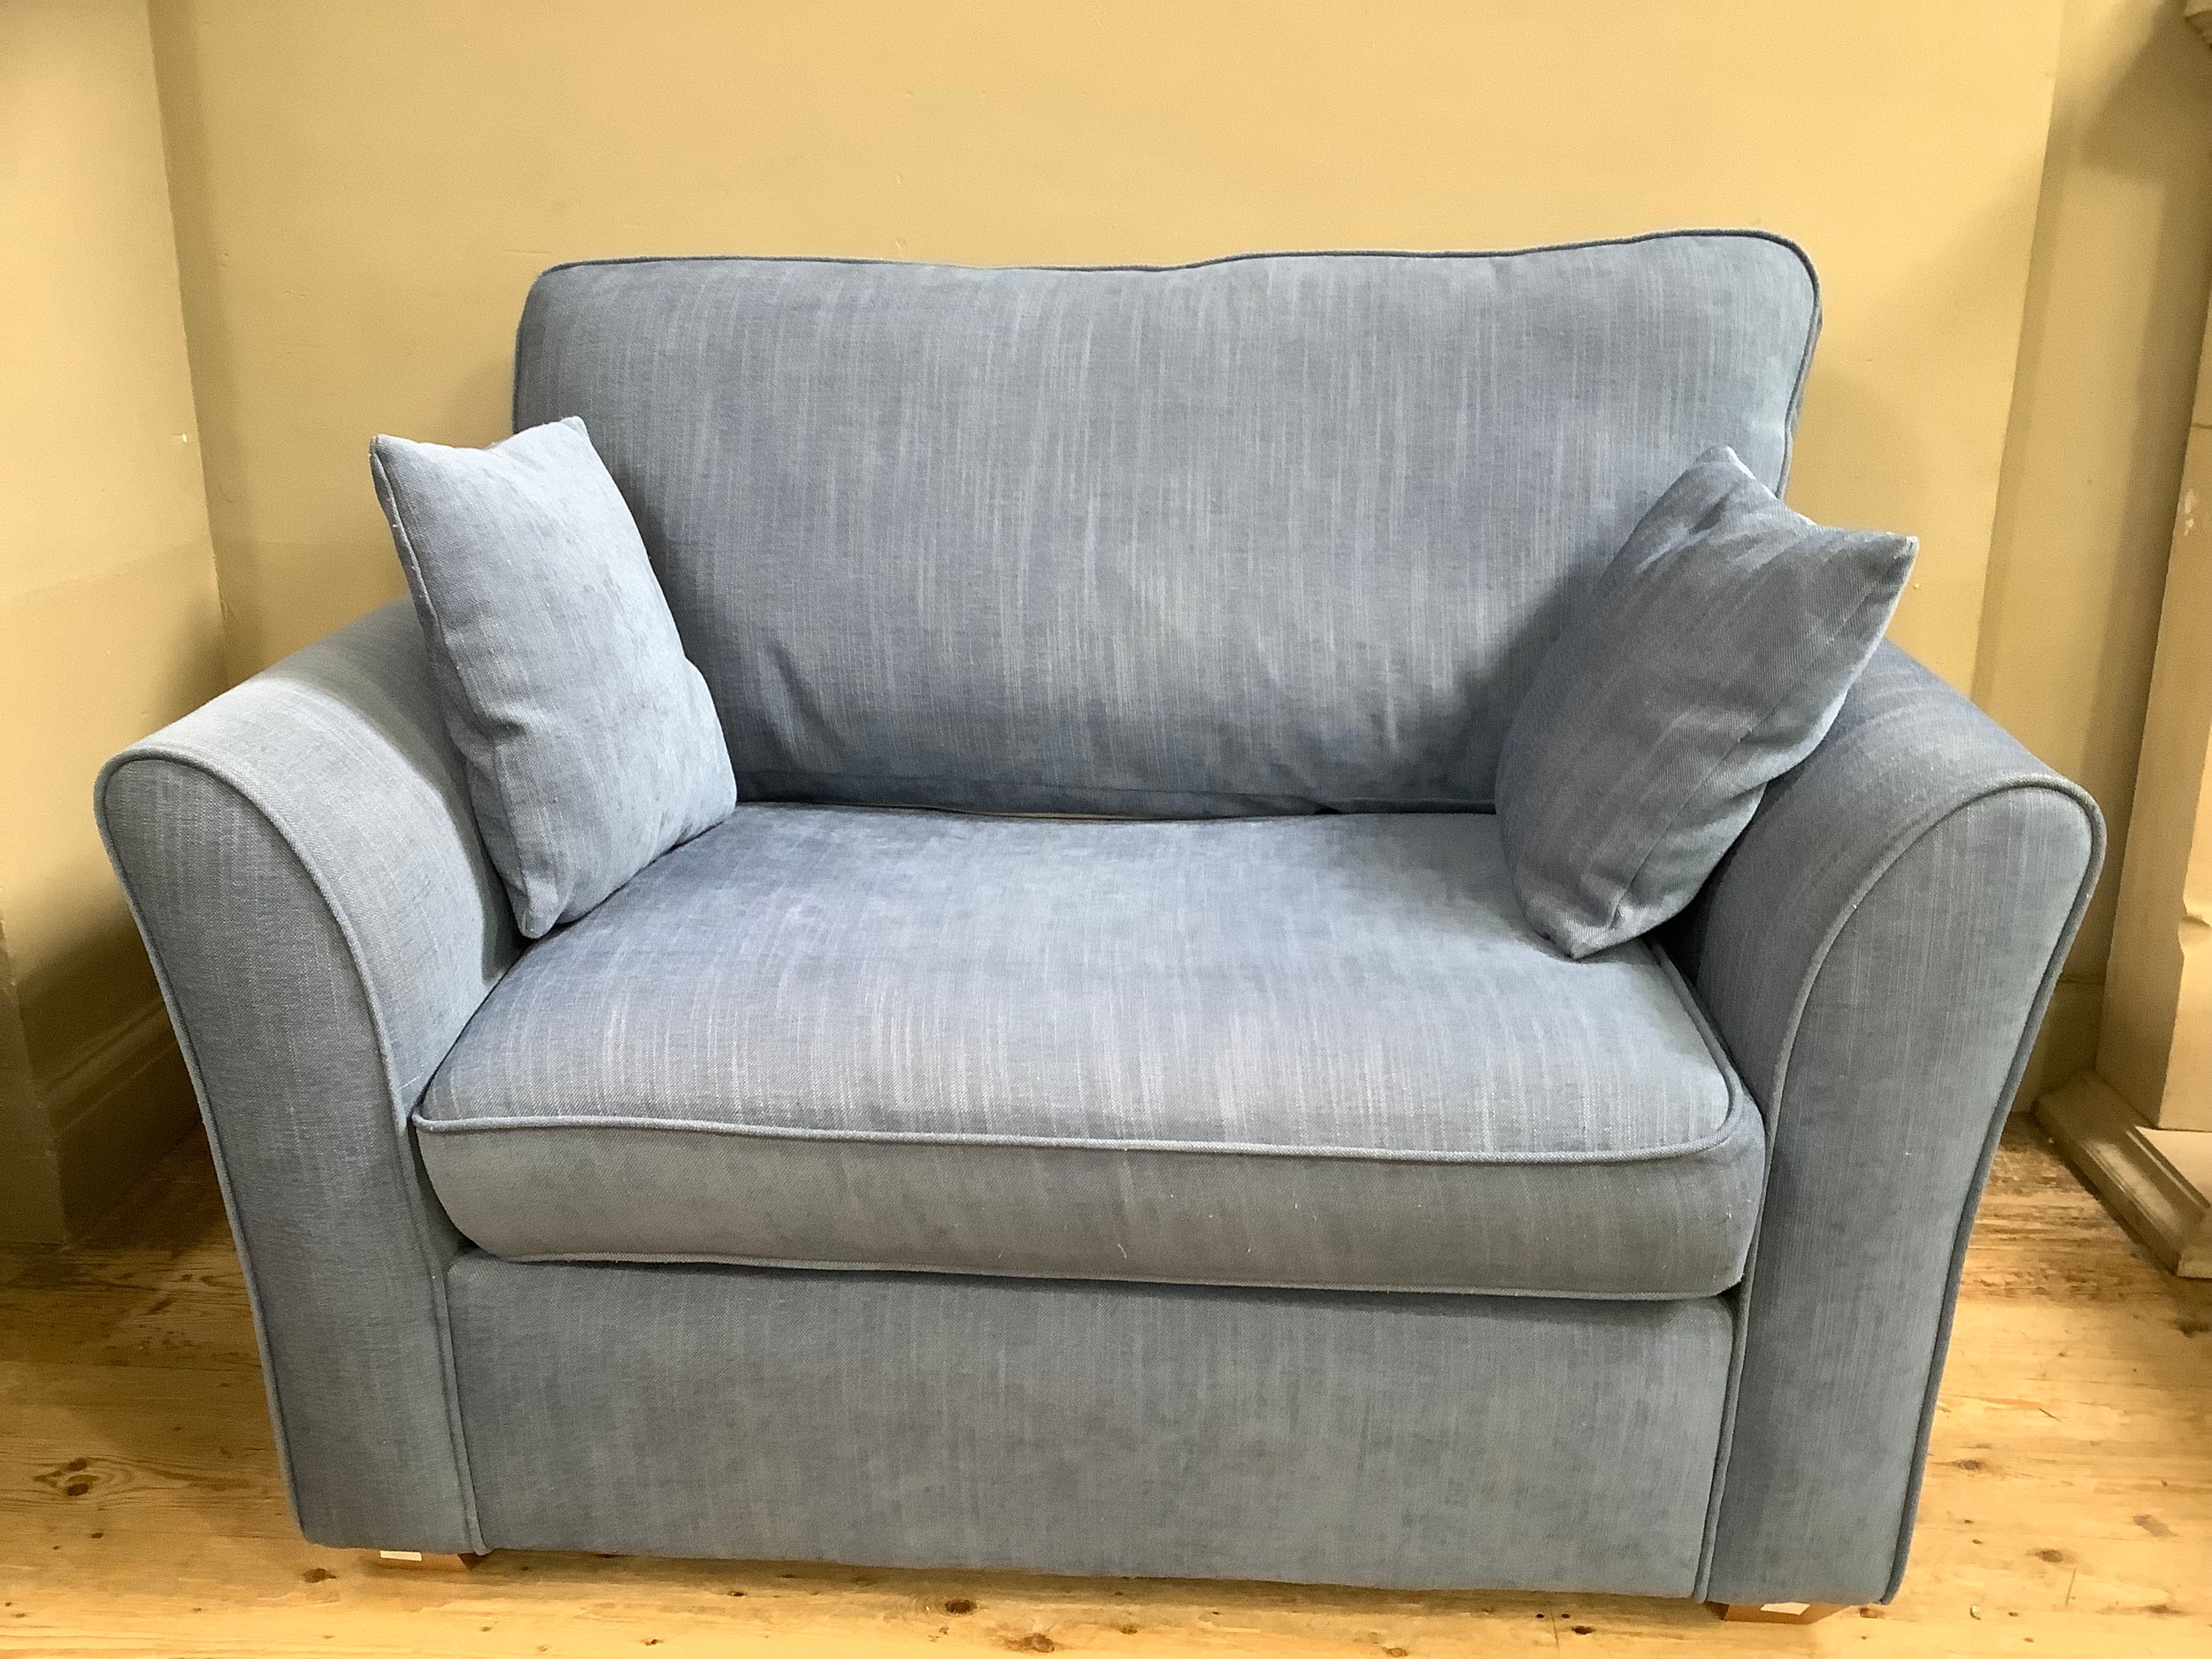 Upholstered armchair-sofa bed of single size, upholstered in blue fabric, 127cm wide